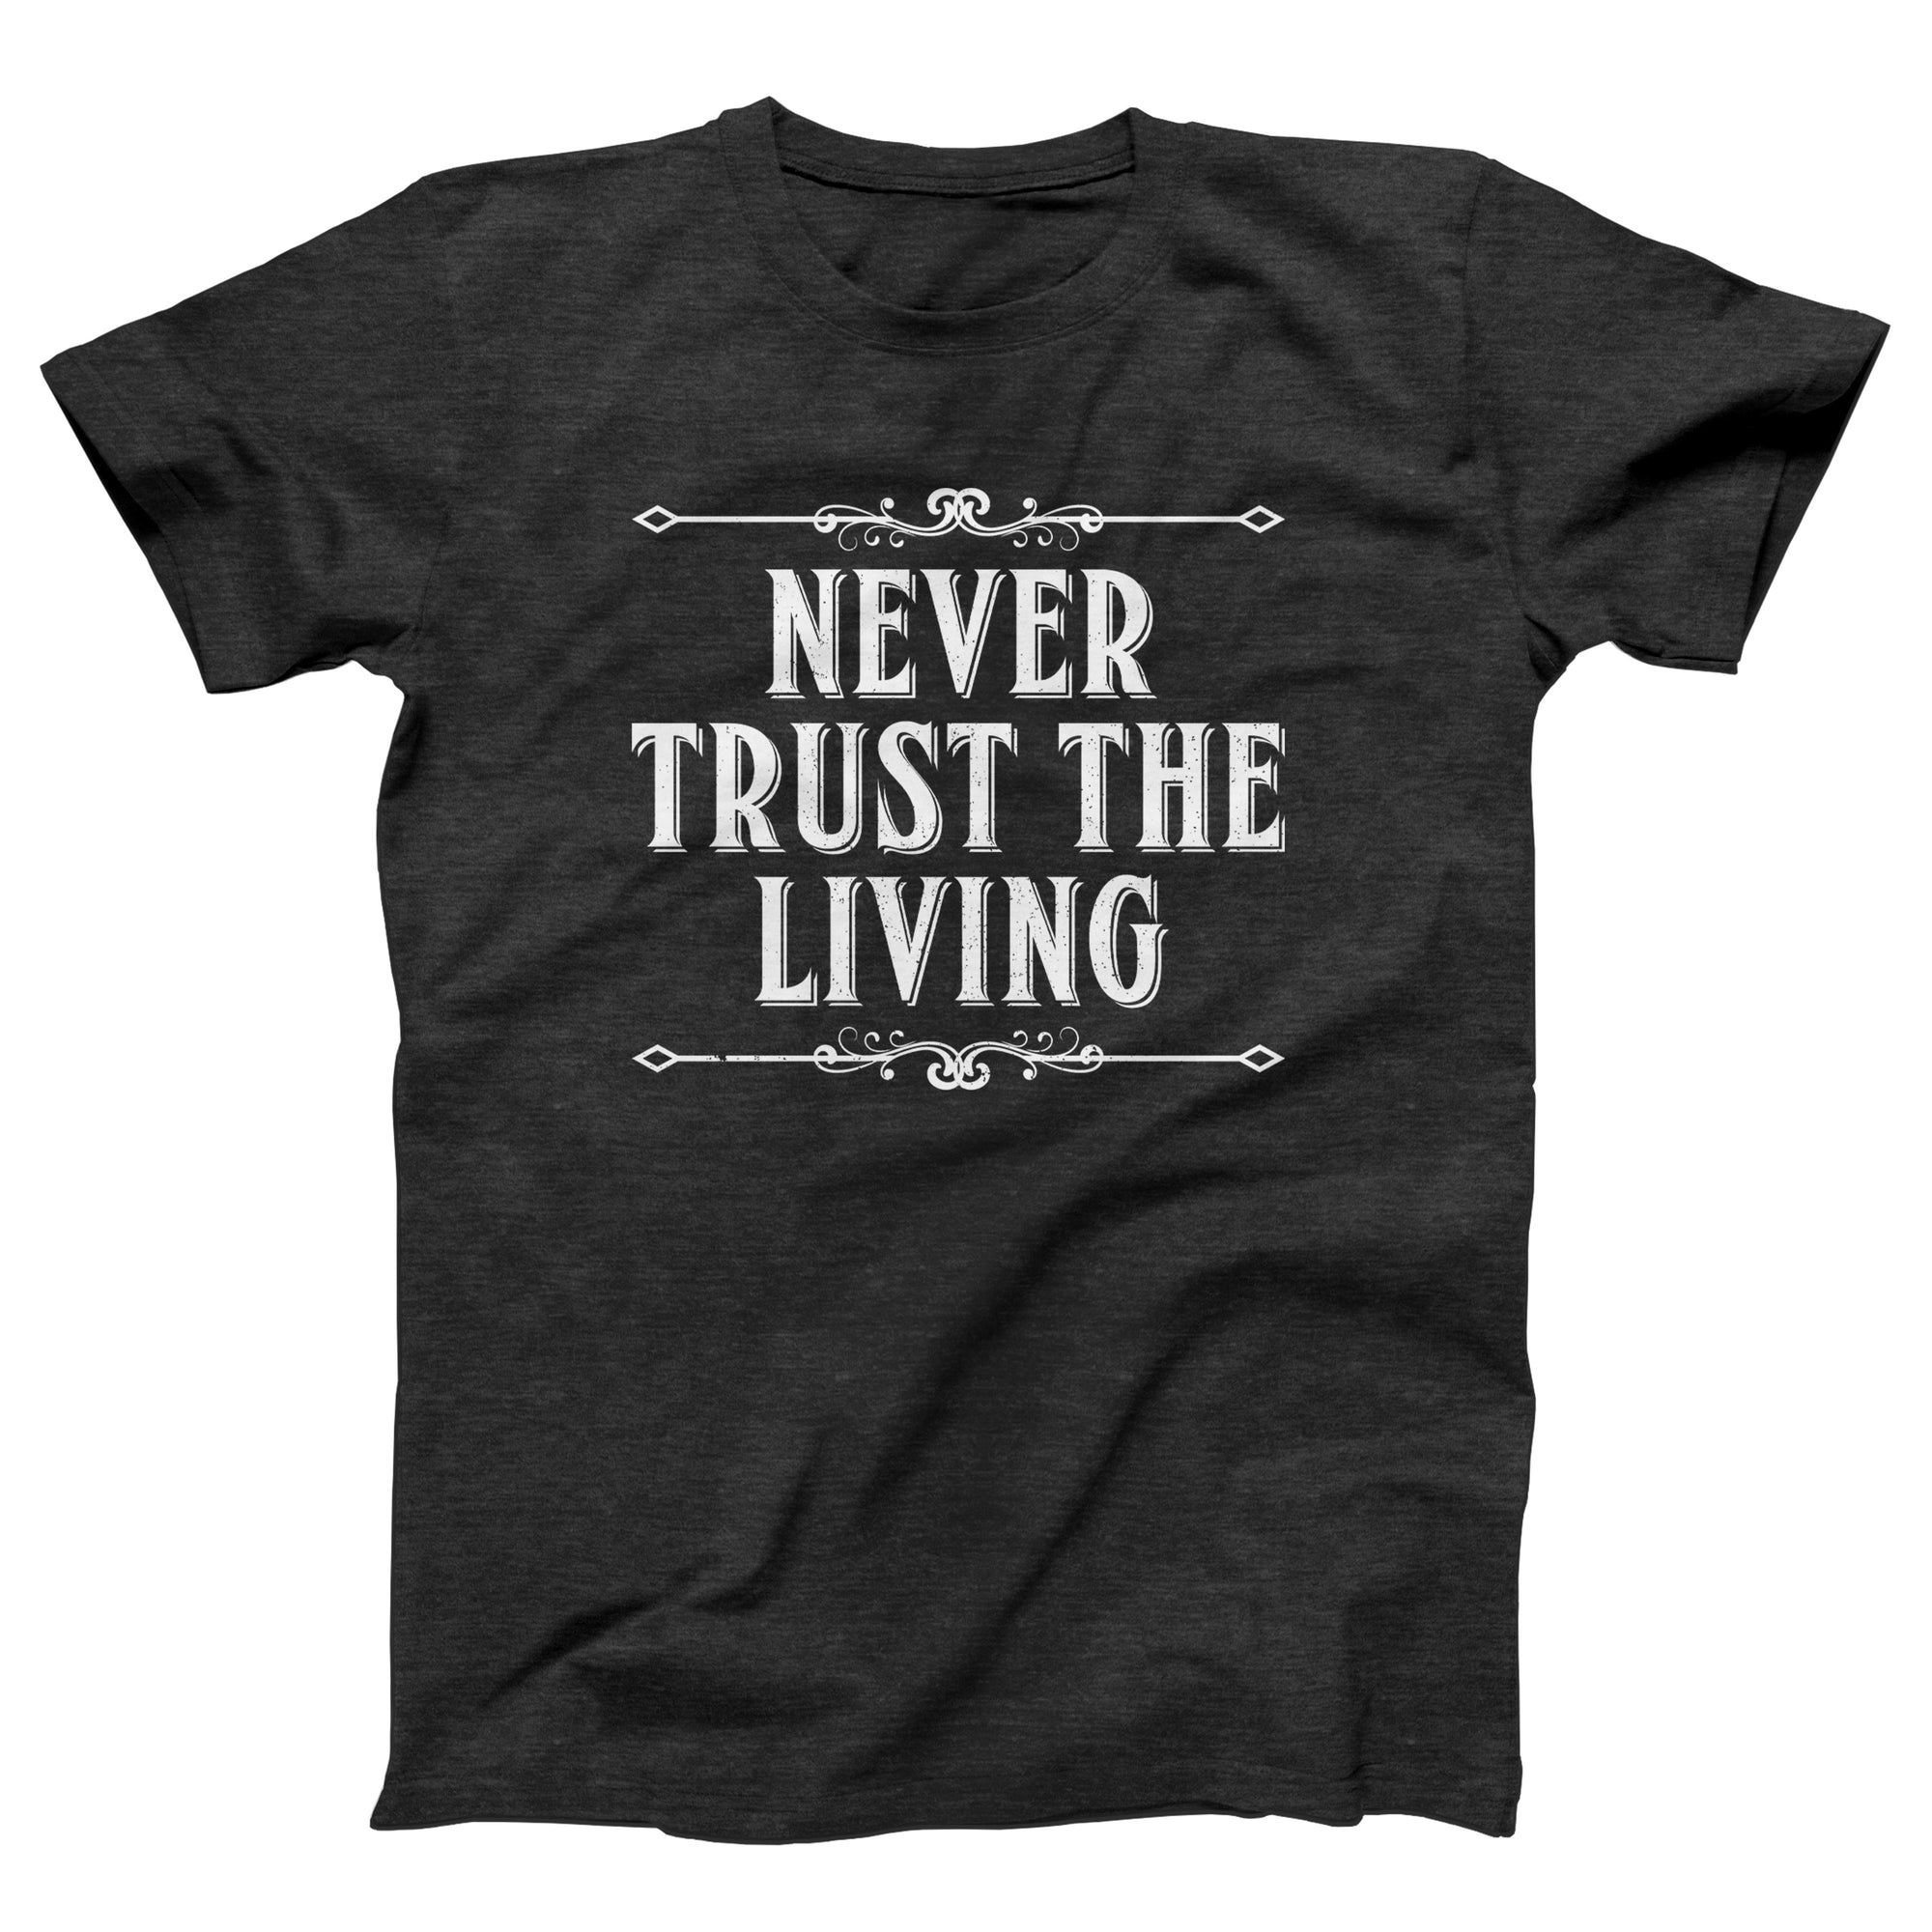 Never Trust the Living Adult Unisex T-Shirt - Twisted Gorilla